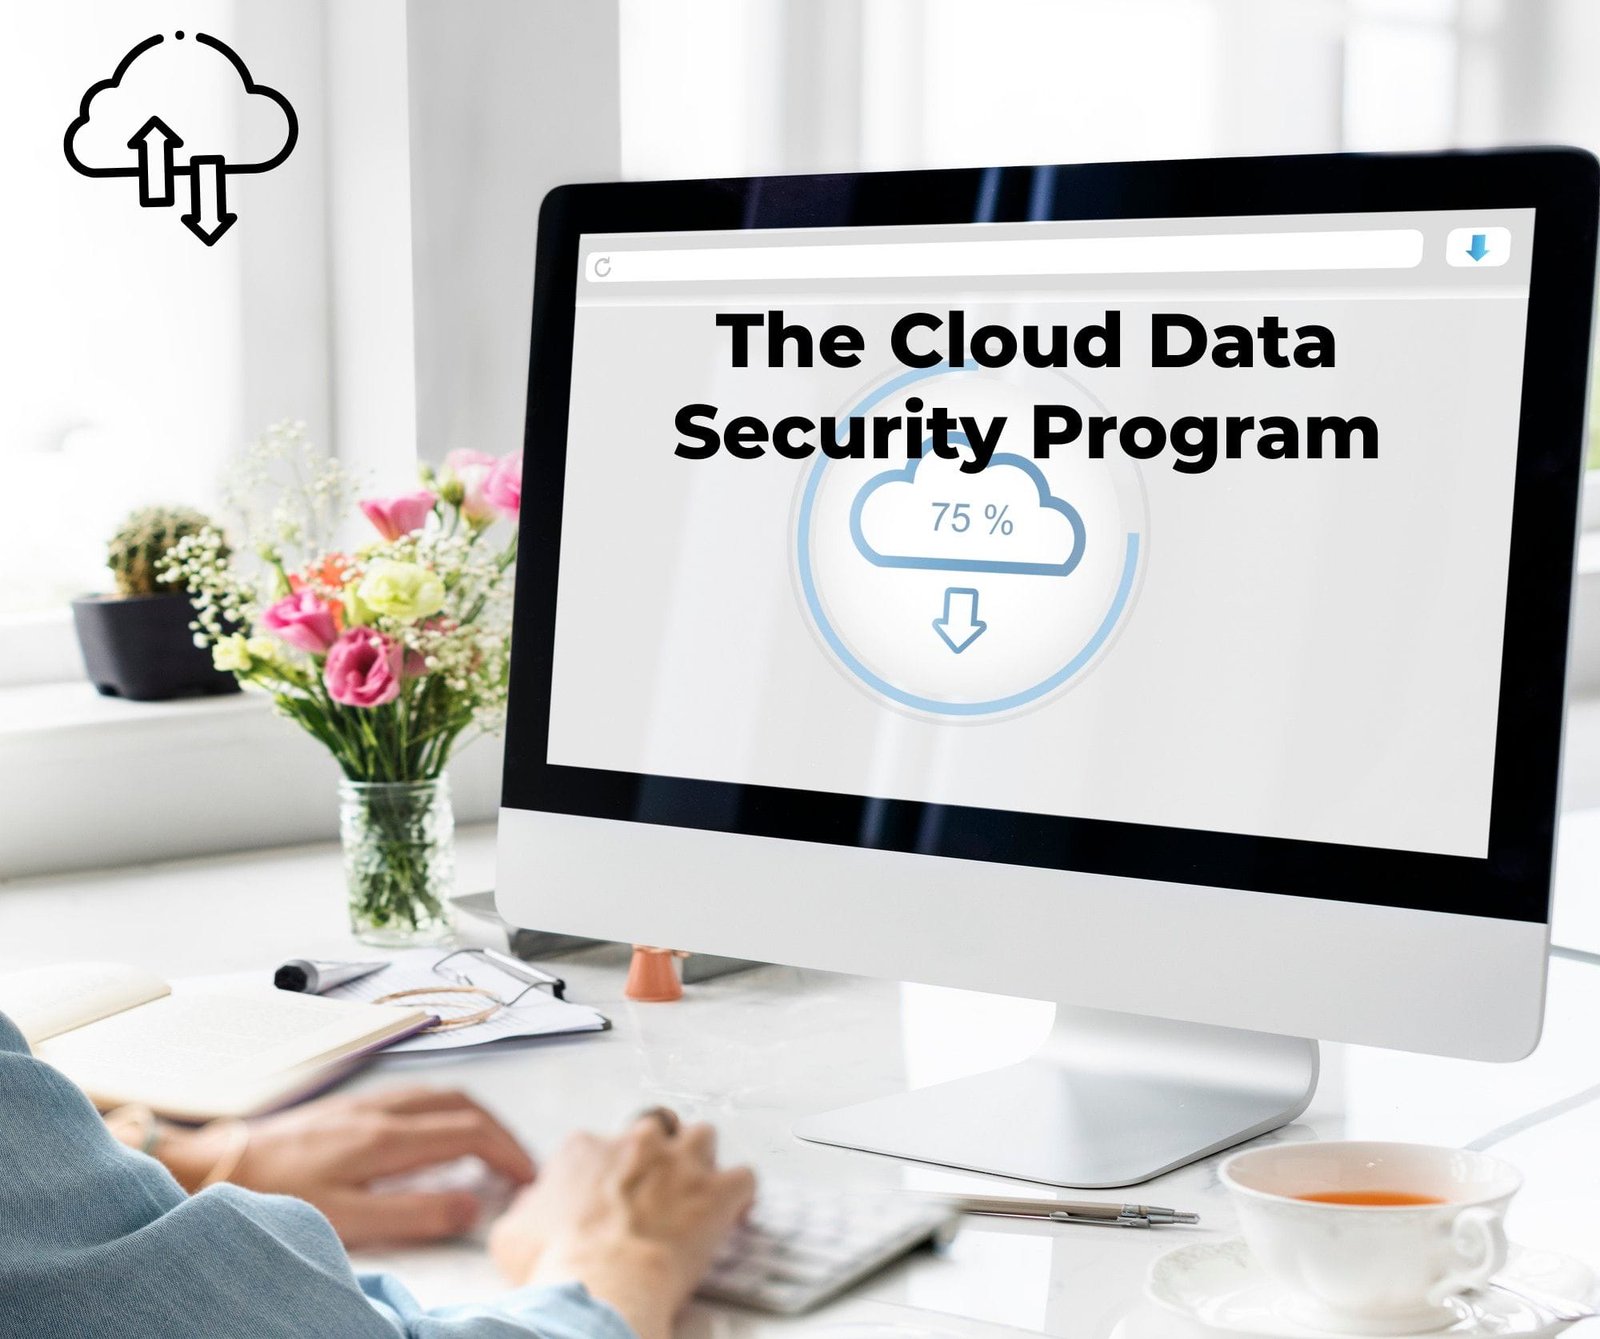 cloud data security program for small business